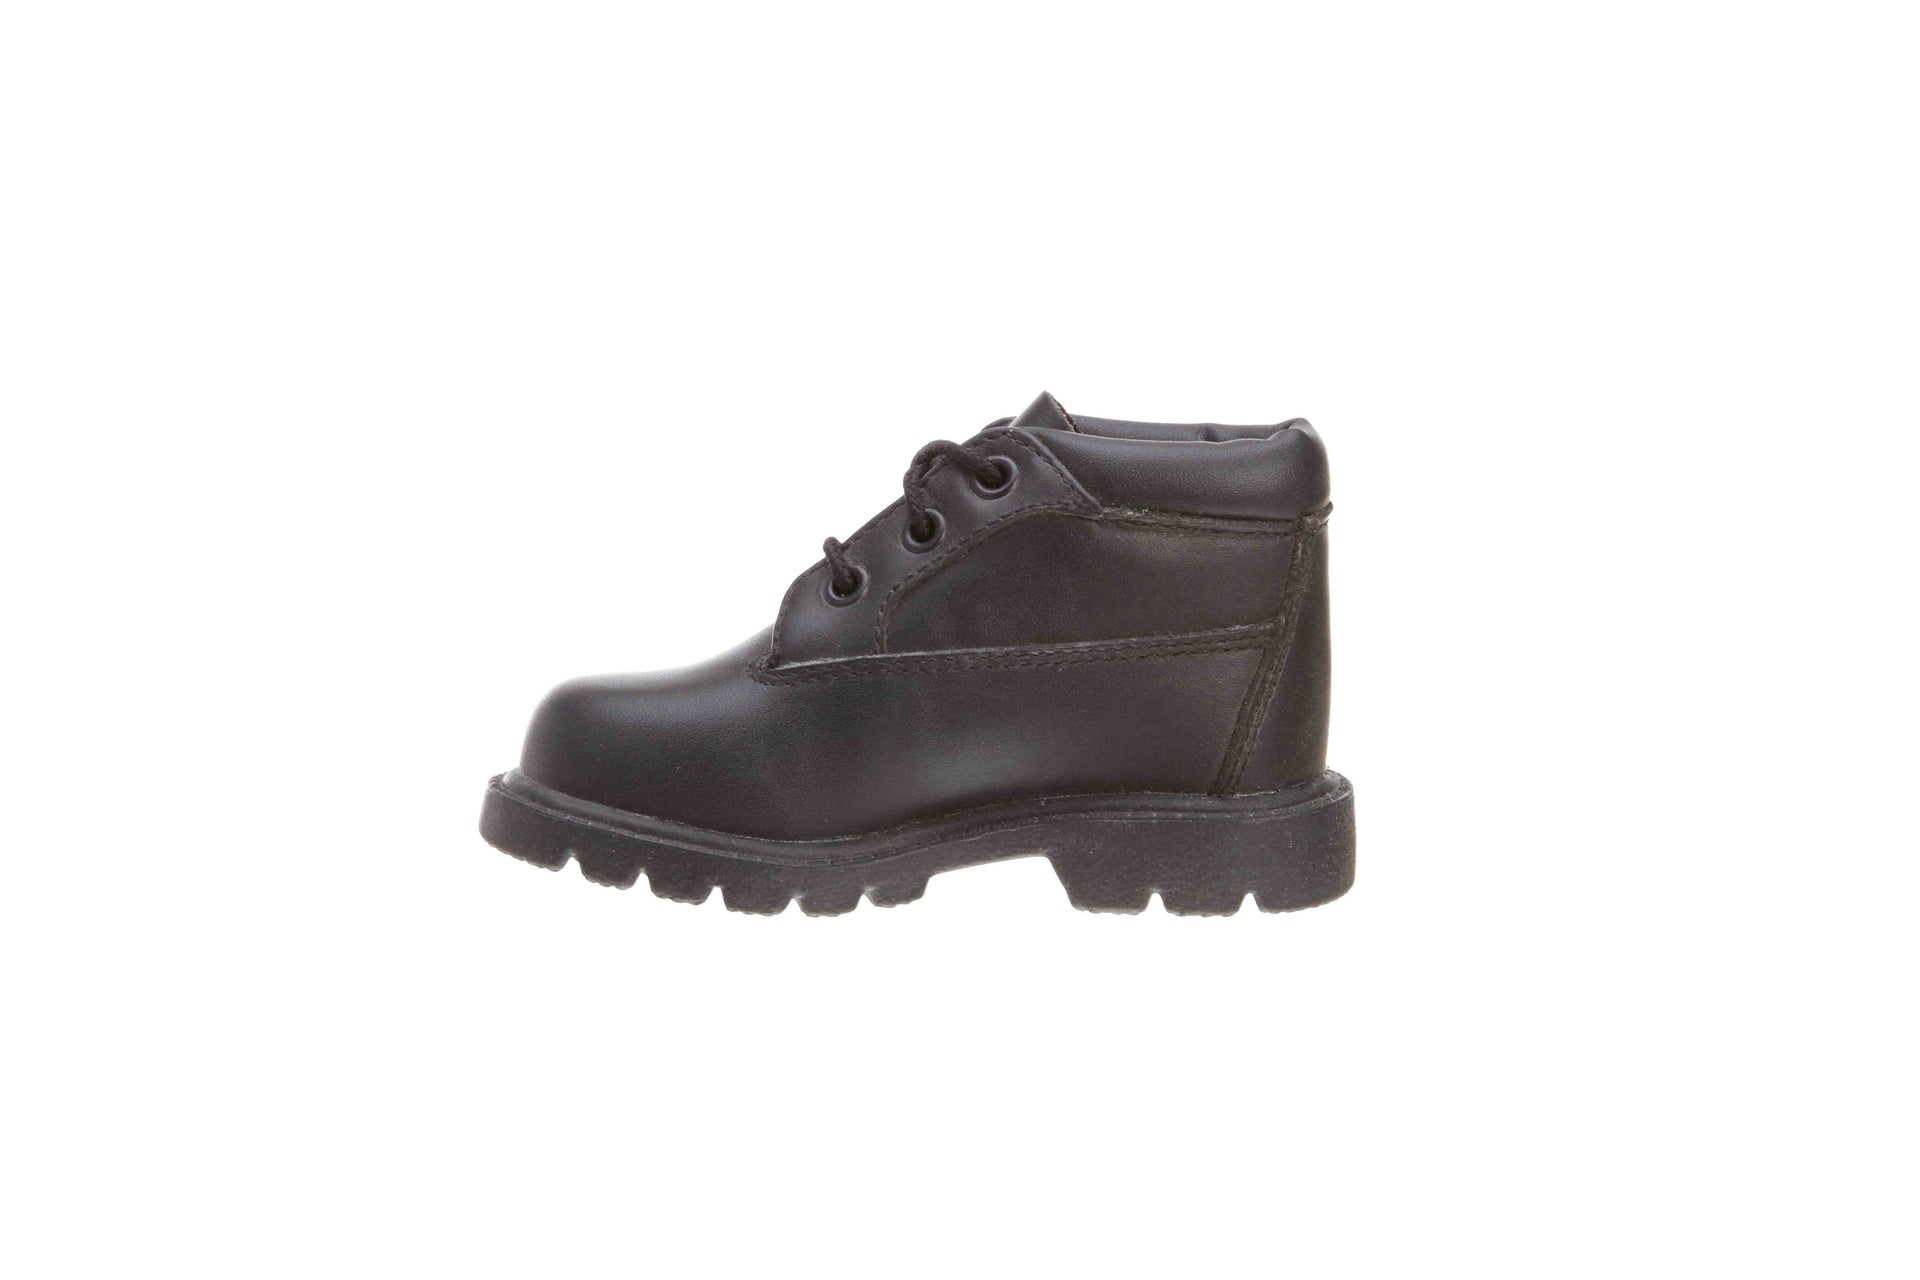 TIMBERLAND PETITS TODDLERS STYLE # 10820